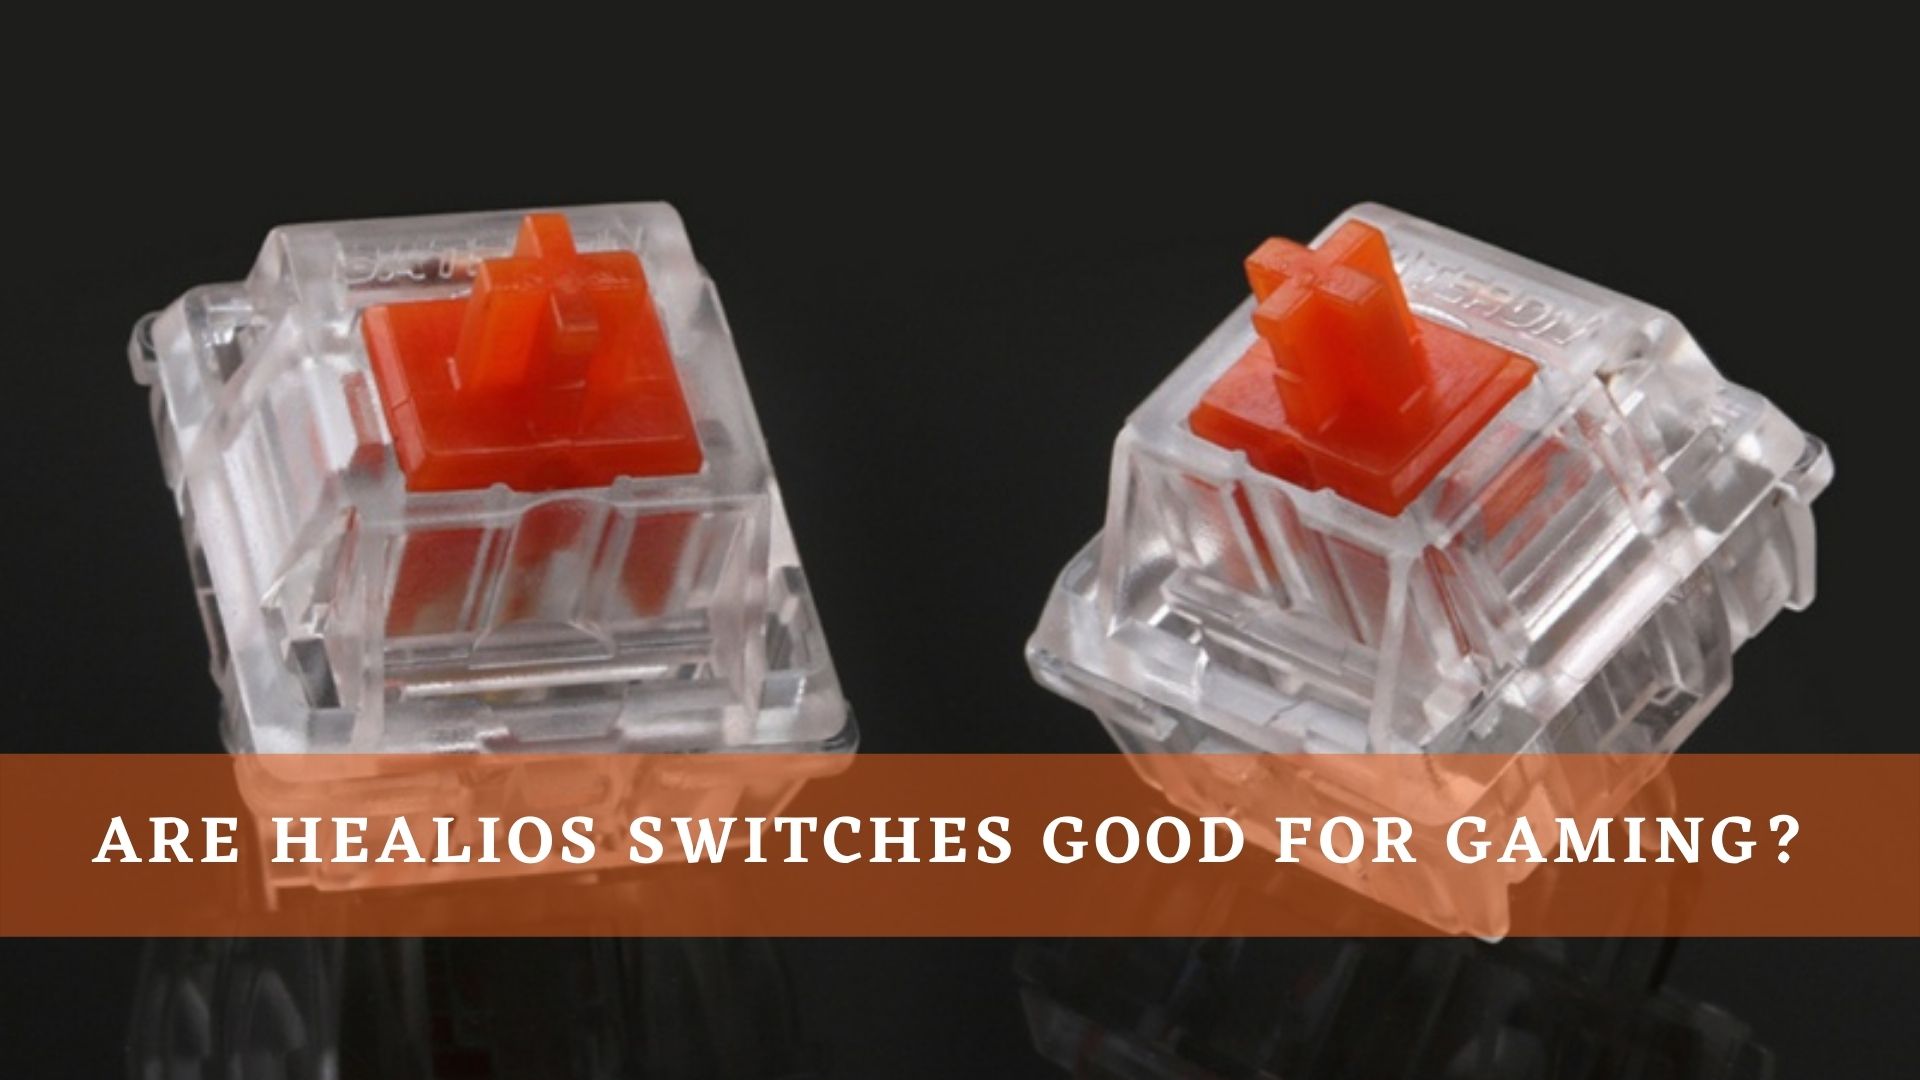 healios v2 Switches for gaming